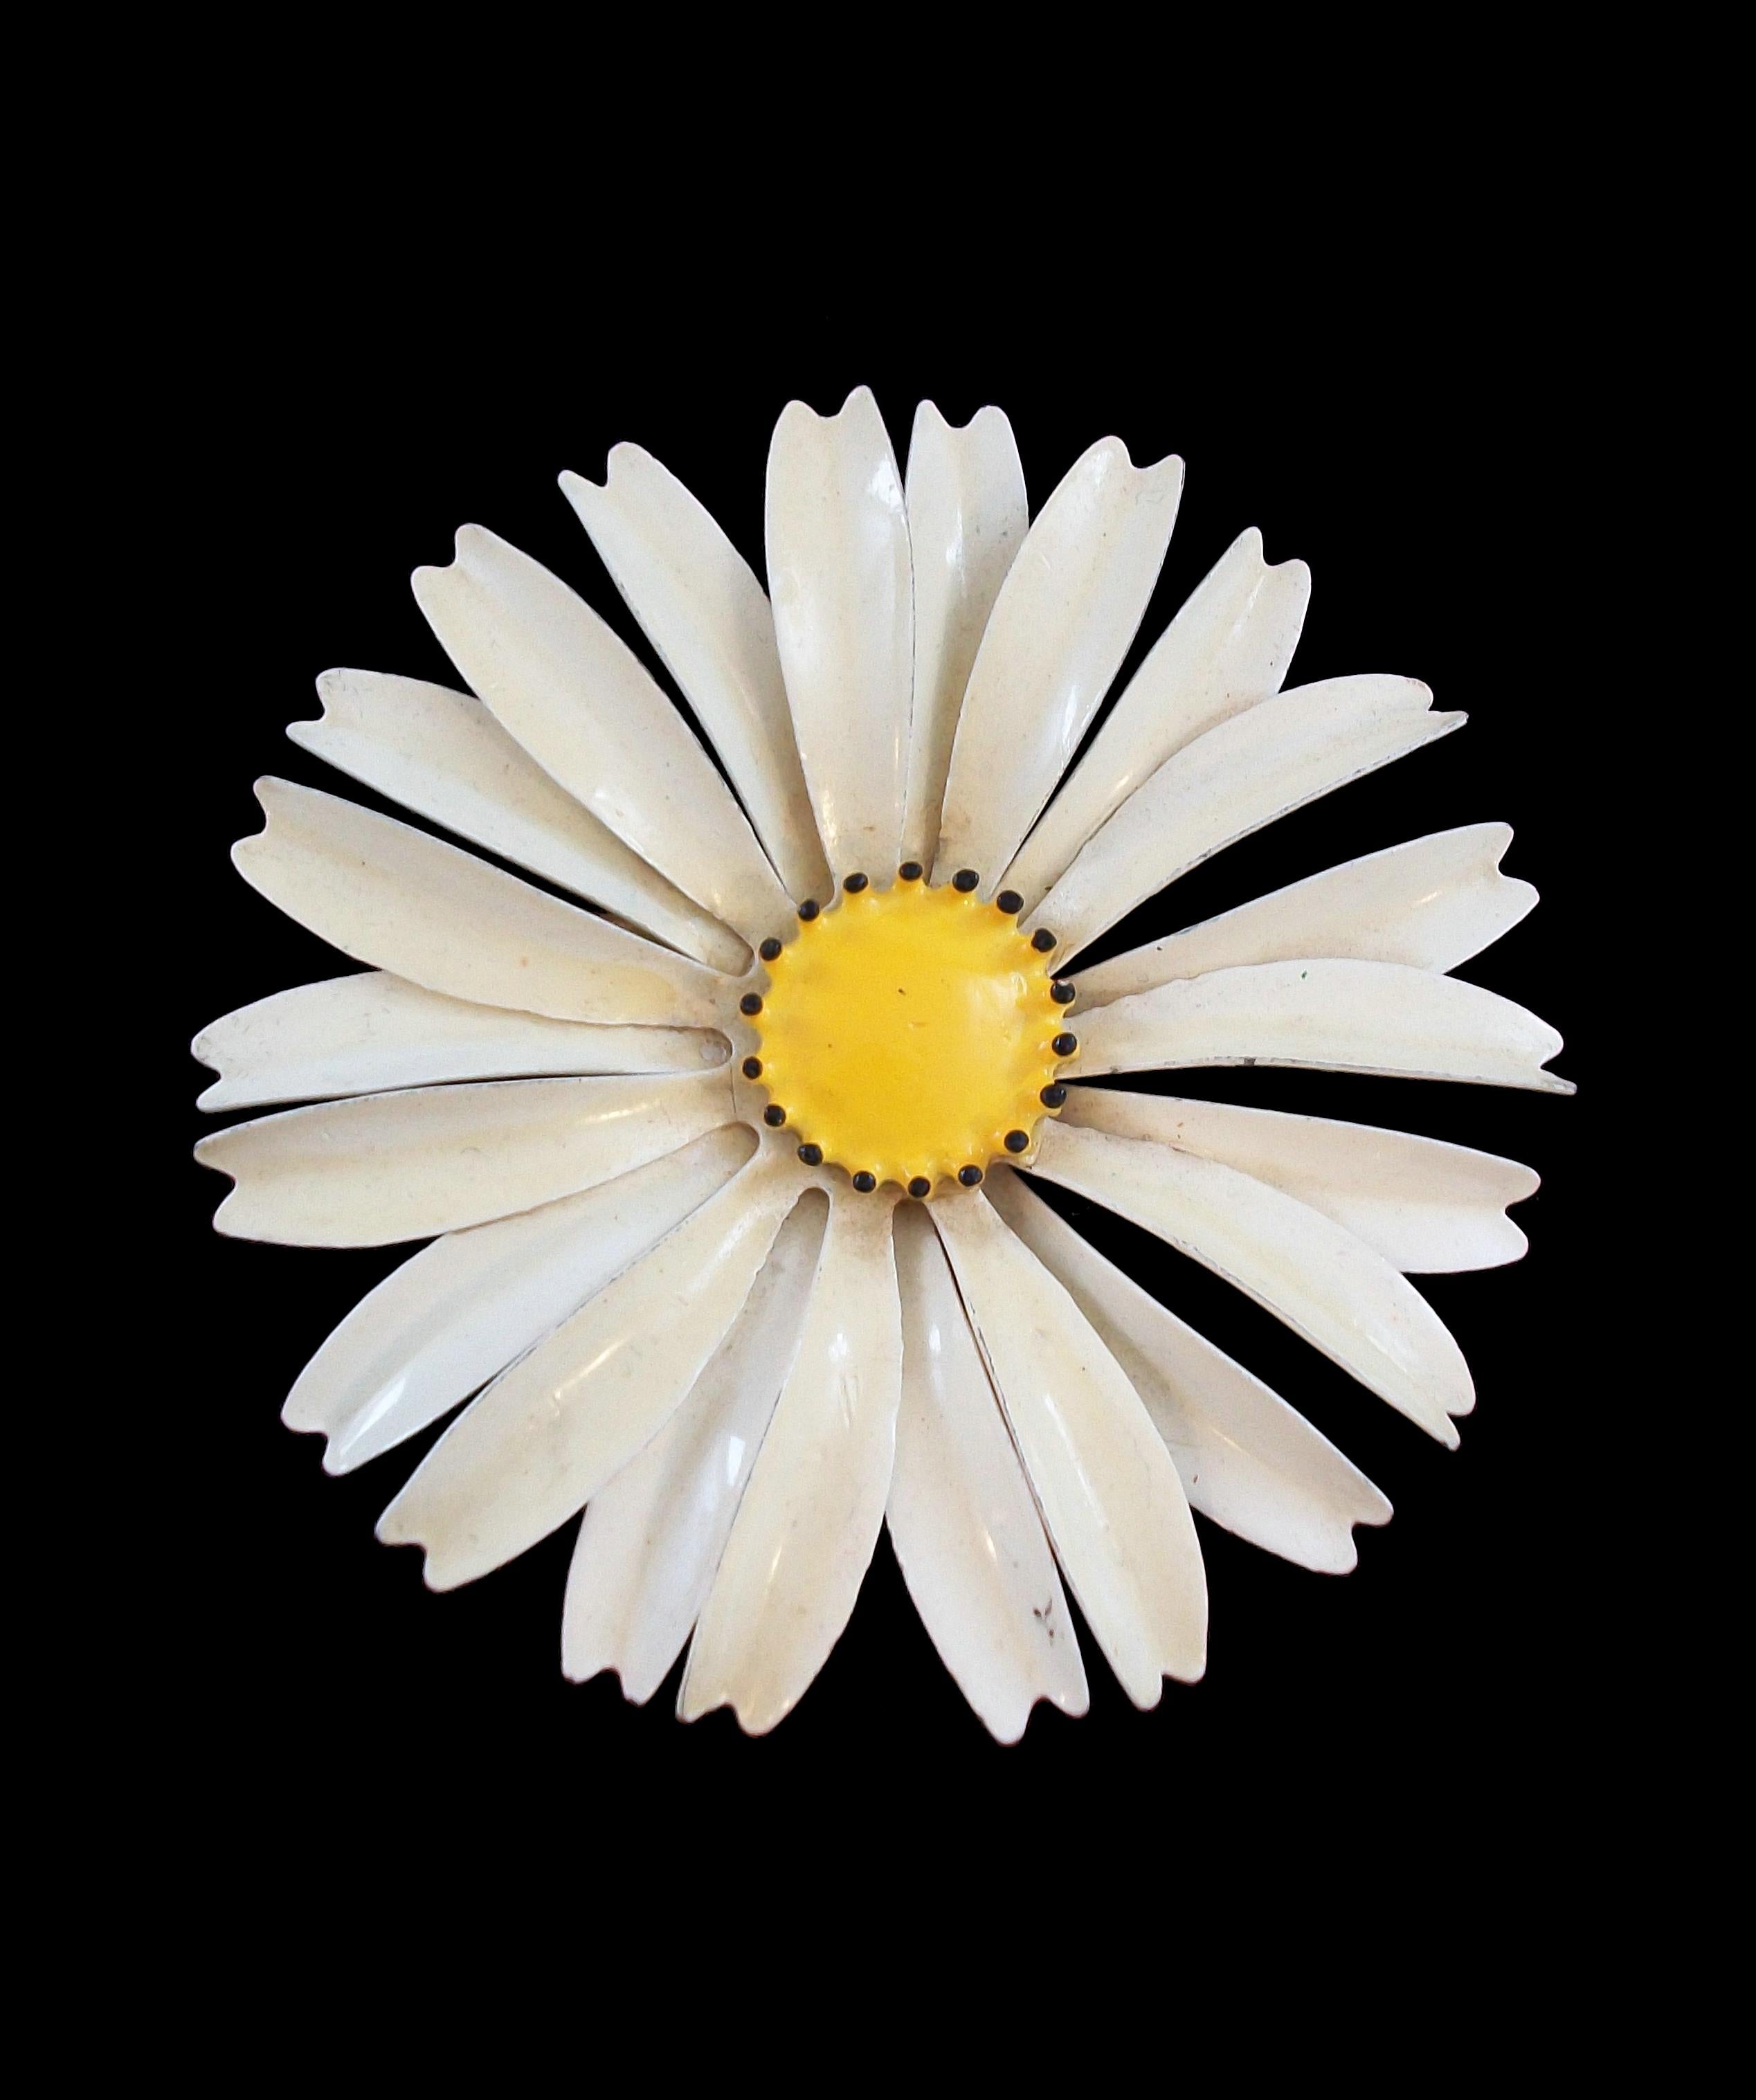 Vintage enamel on metal Daisy brooch - large size - unsigned - United States (likely) - circa 1960's.

Good vintage condition - minor paint/enamel loss - no damage - no repairs - sturdy pin and closure - minor surface scuffs and scratches to the